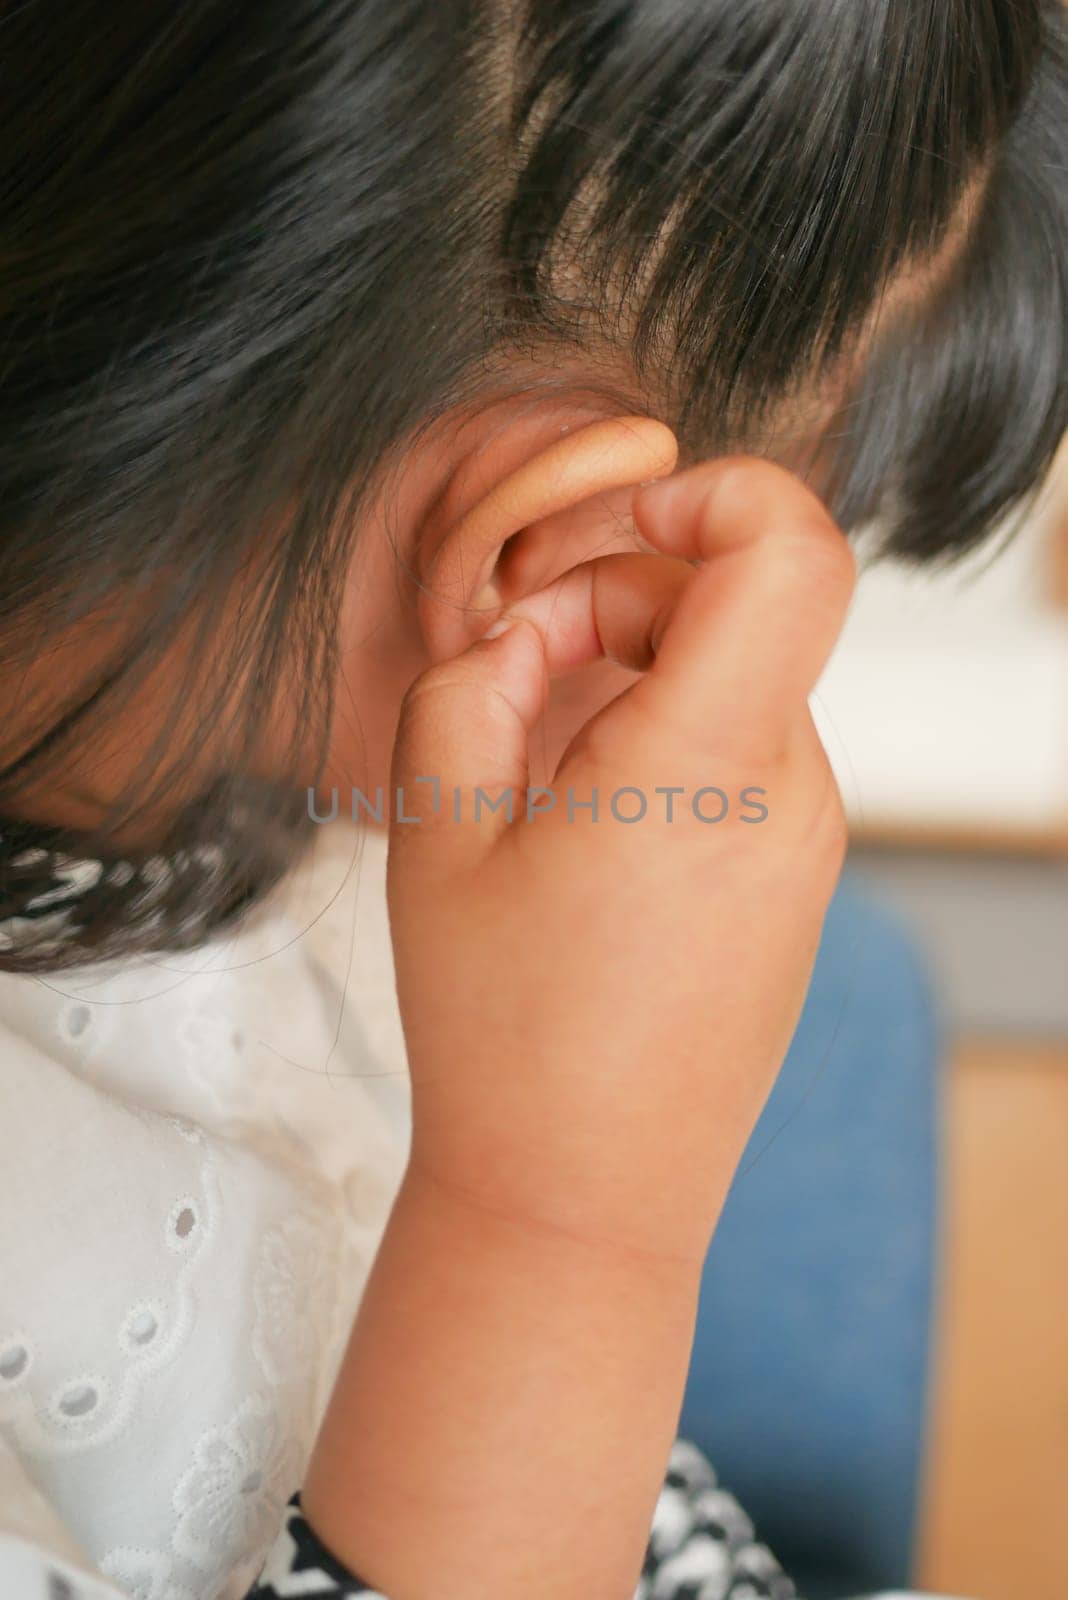 child having ear pain touching his painful ear , by towfiq007